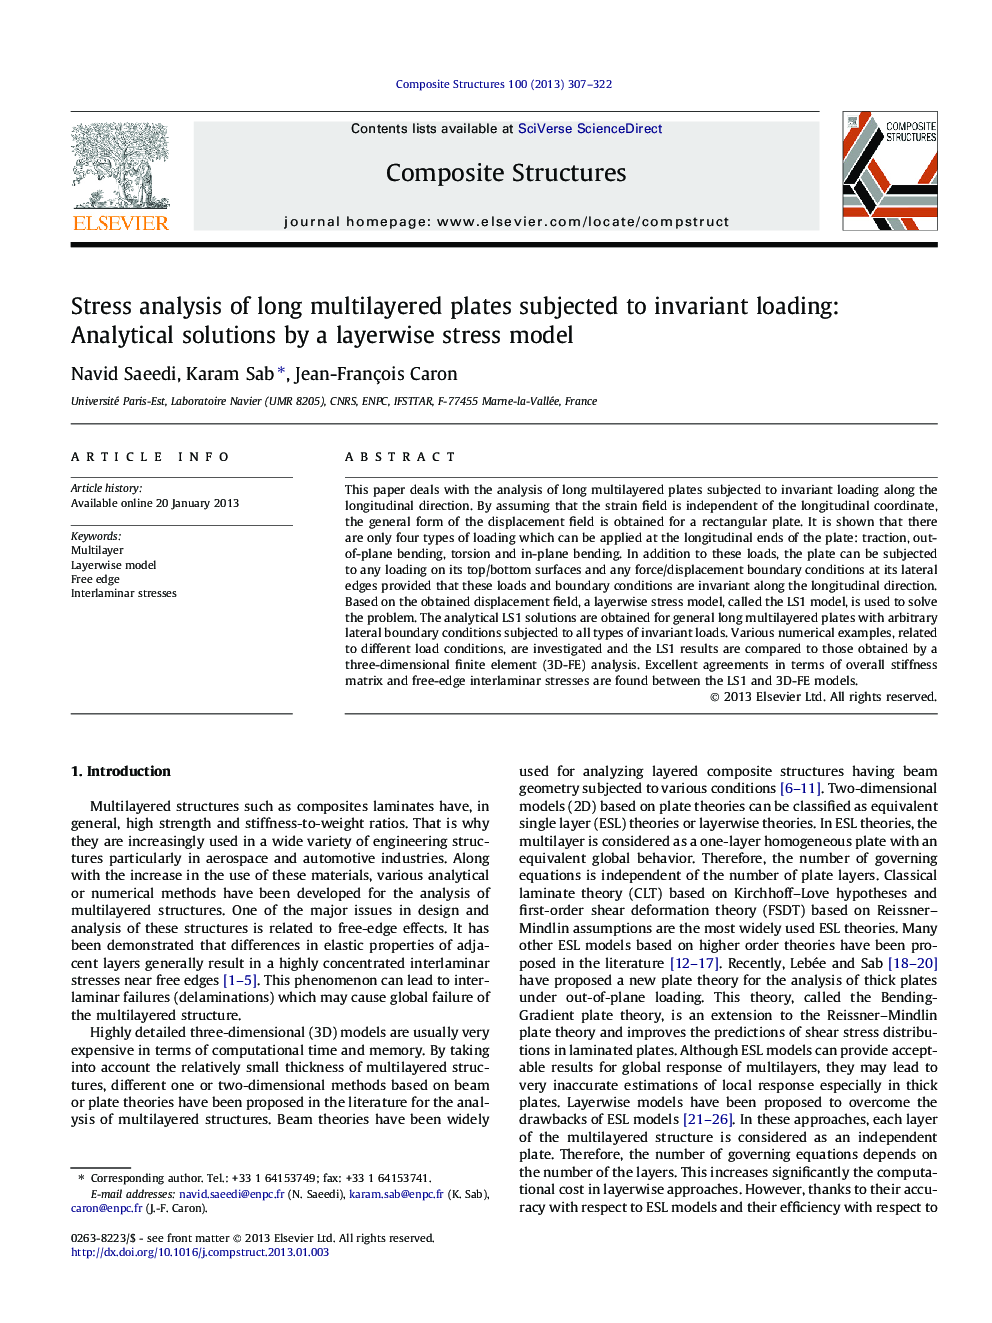 Stress analysis of long multilayered plates subjected to invariant loading: Analytical solutions by a layerwise stress model